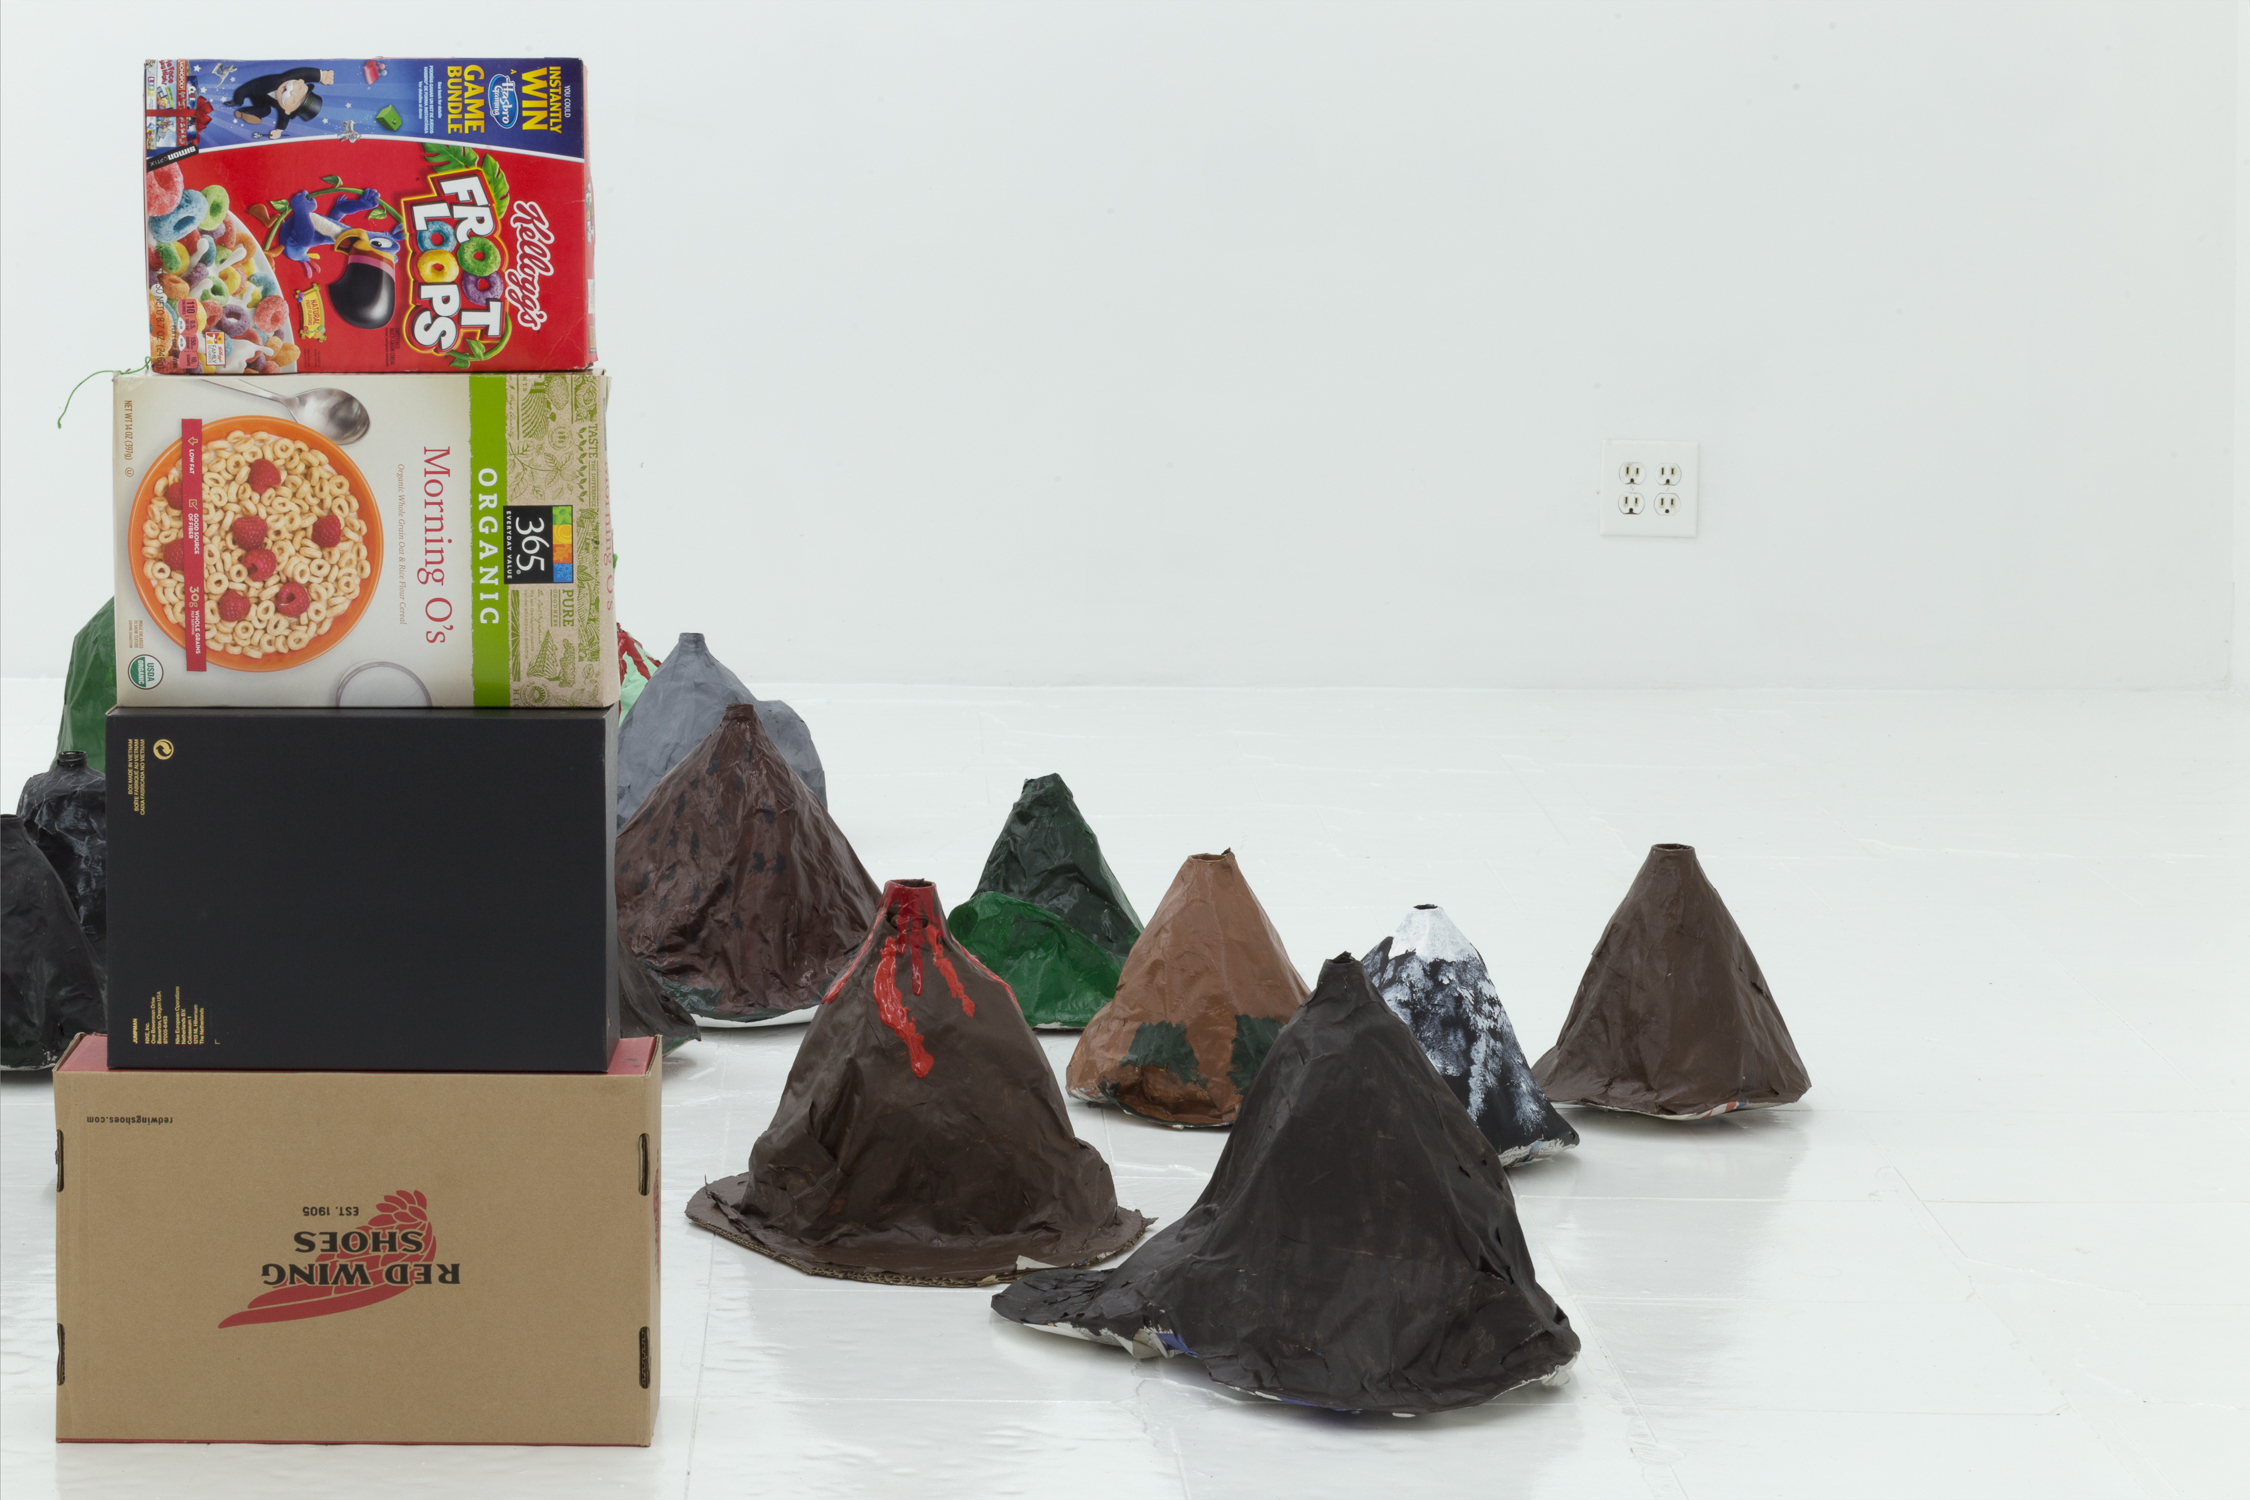 Stack of cereal and shoe boxes in the foreground; papier mache volcanoes in the background